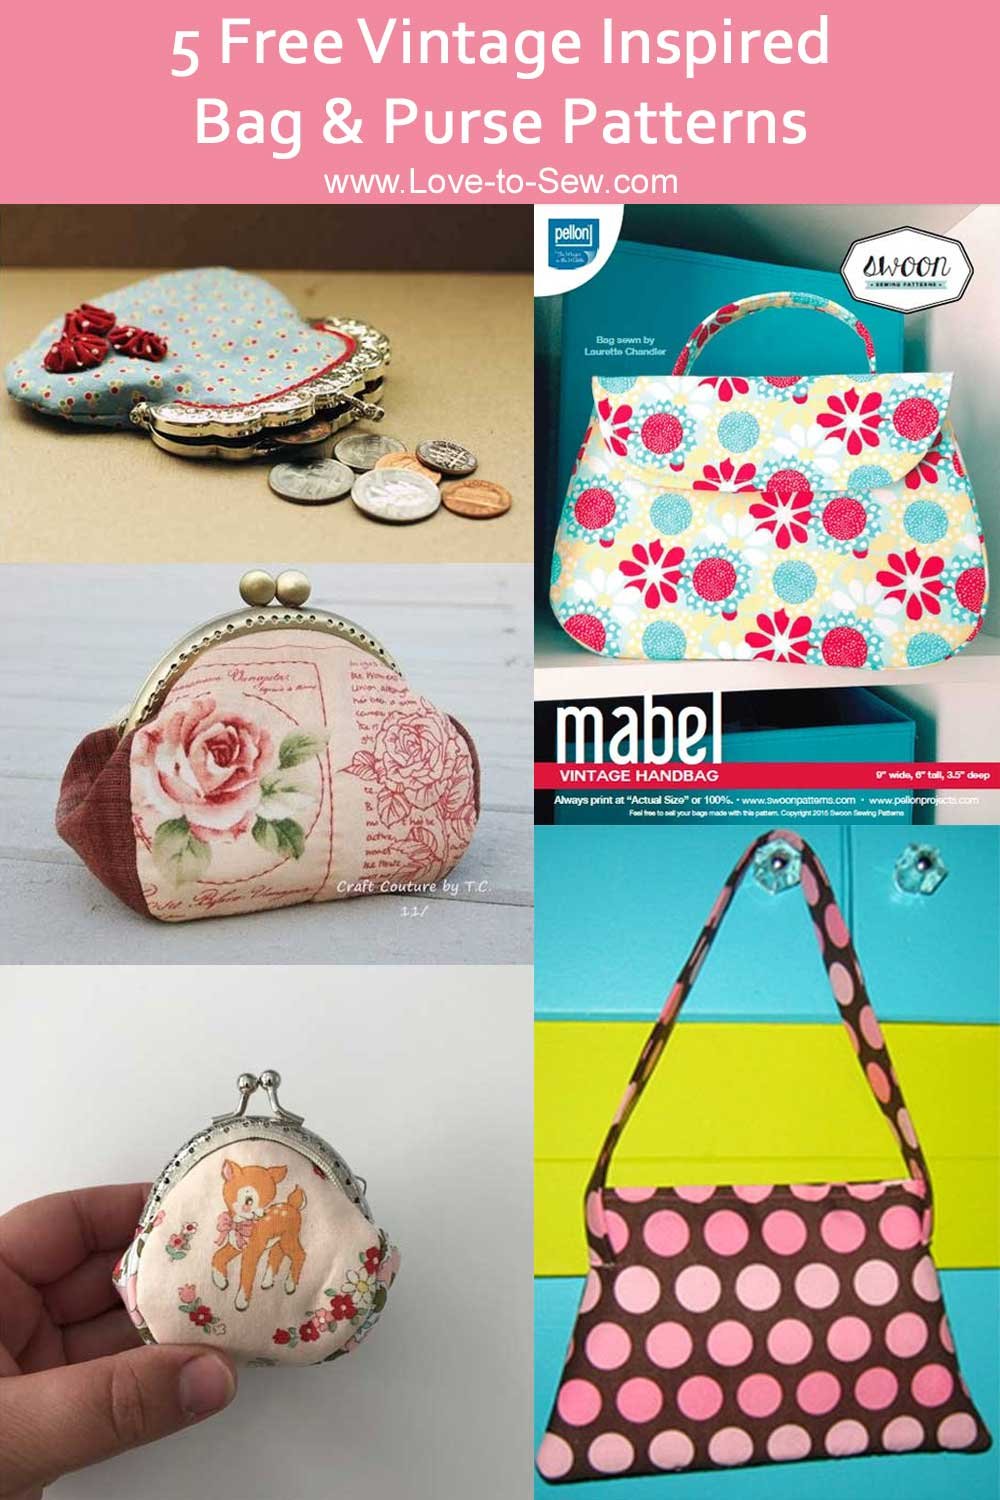 5 Free Vintage Style Purse & Bag Patterns to Sew